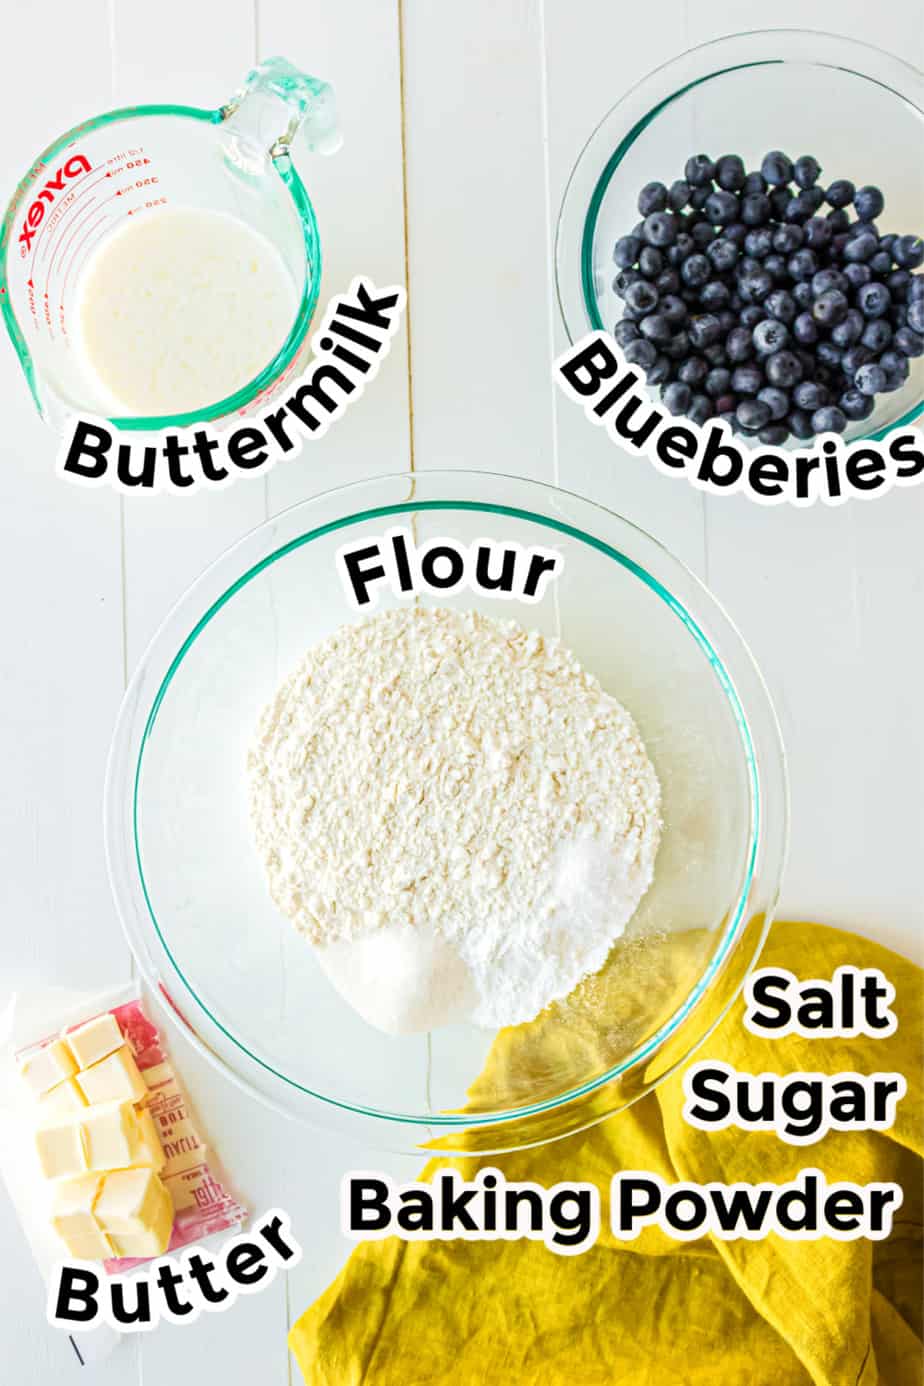 Ingredients for blueberry buttermilk biscuits.